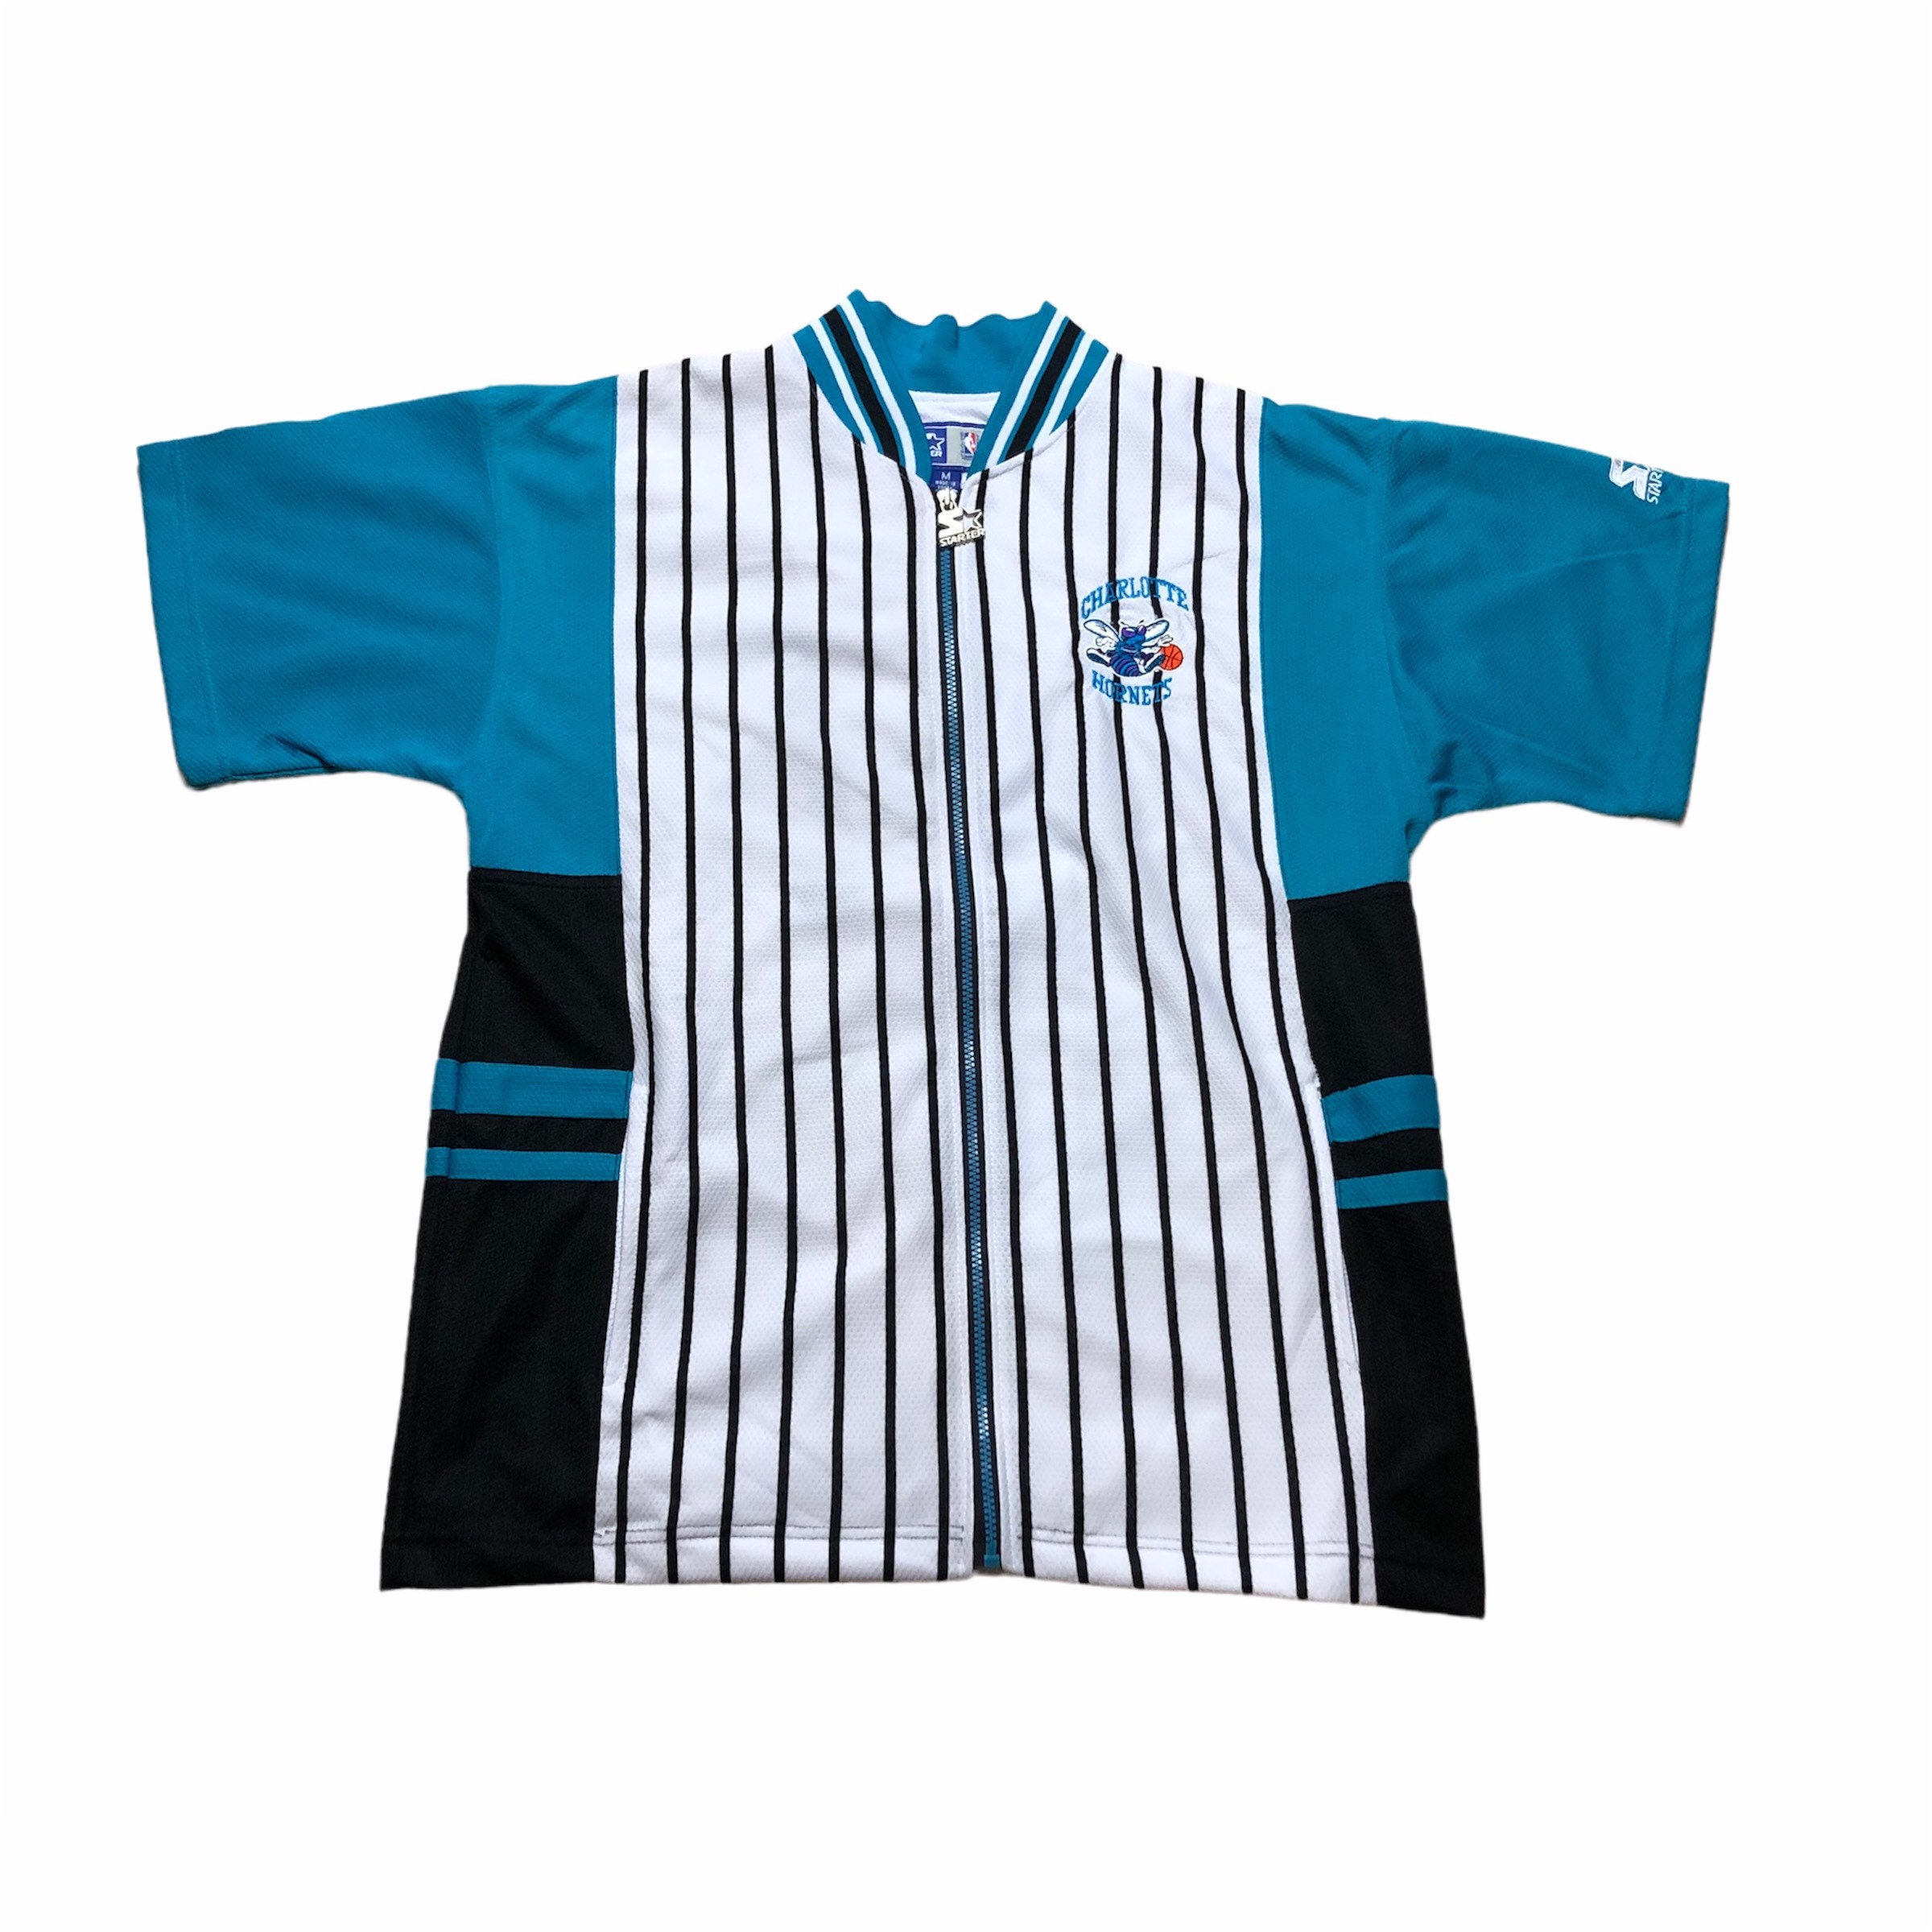 Charlotte Hornets to wear white pinstripe throwback uniforms